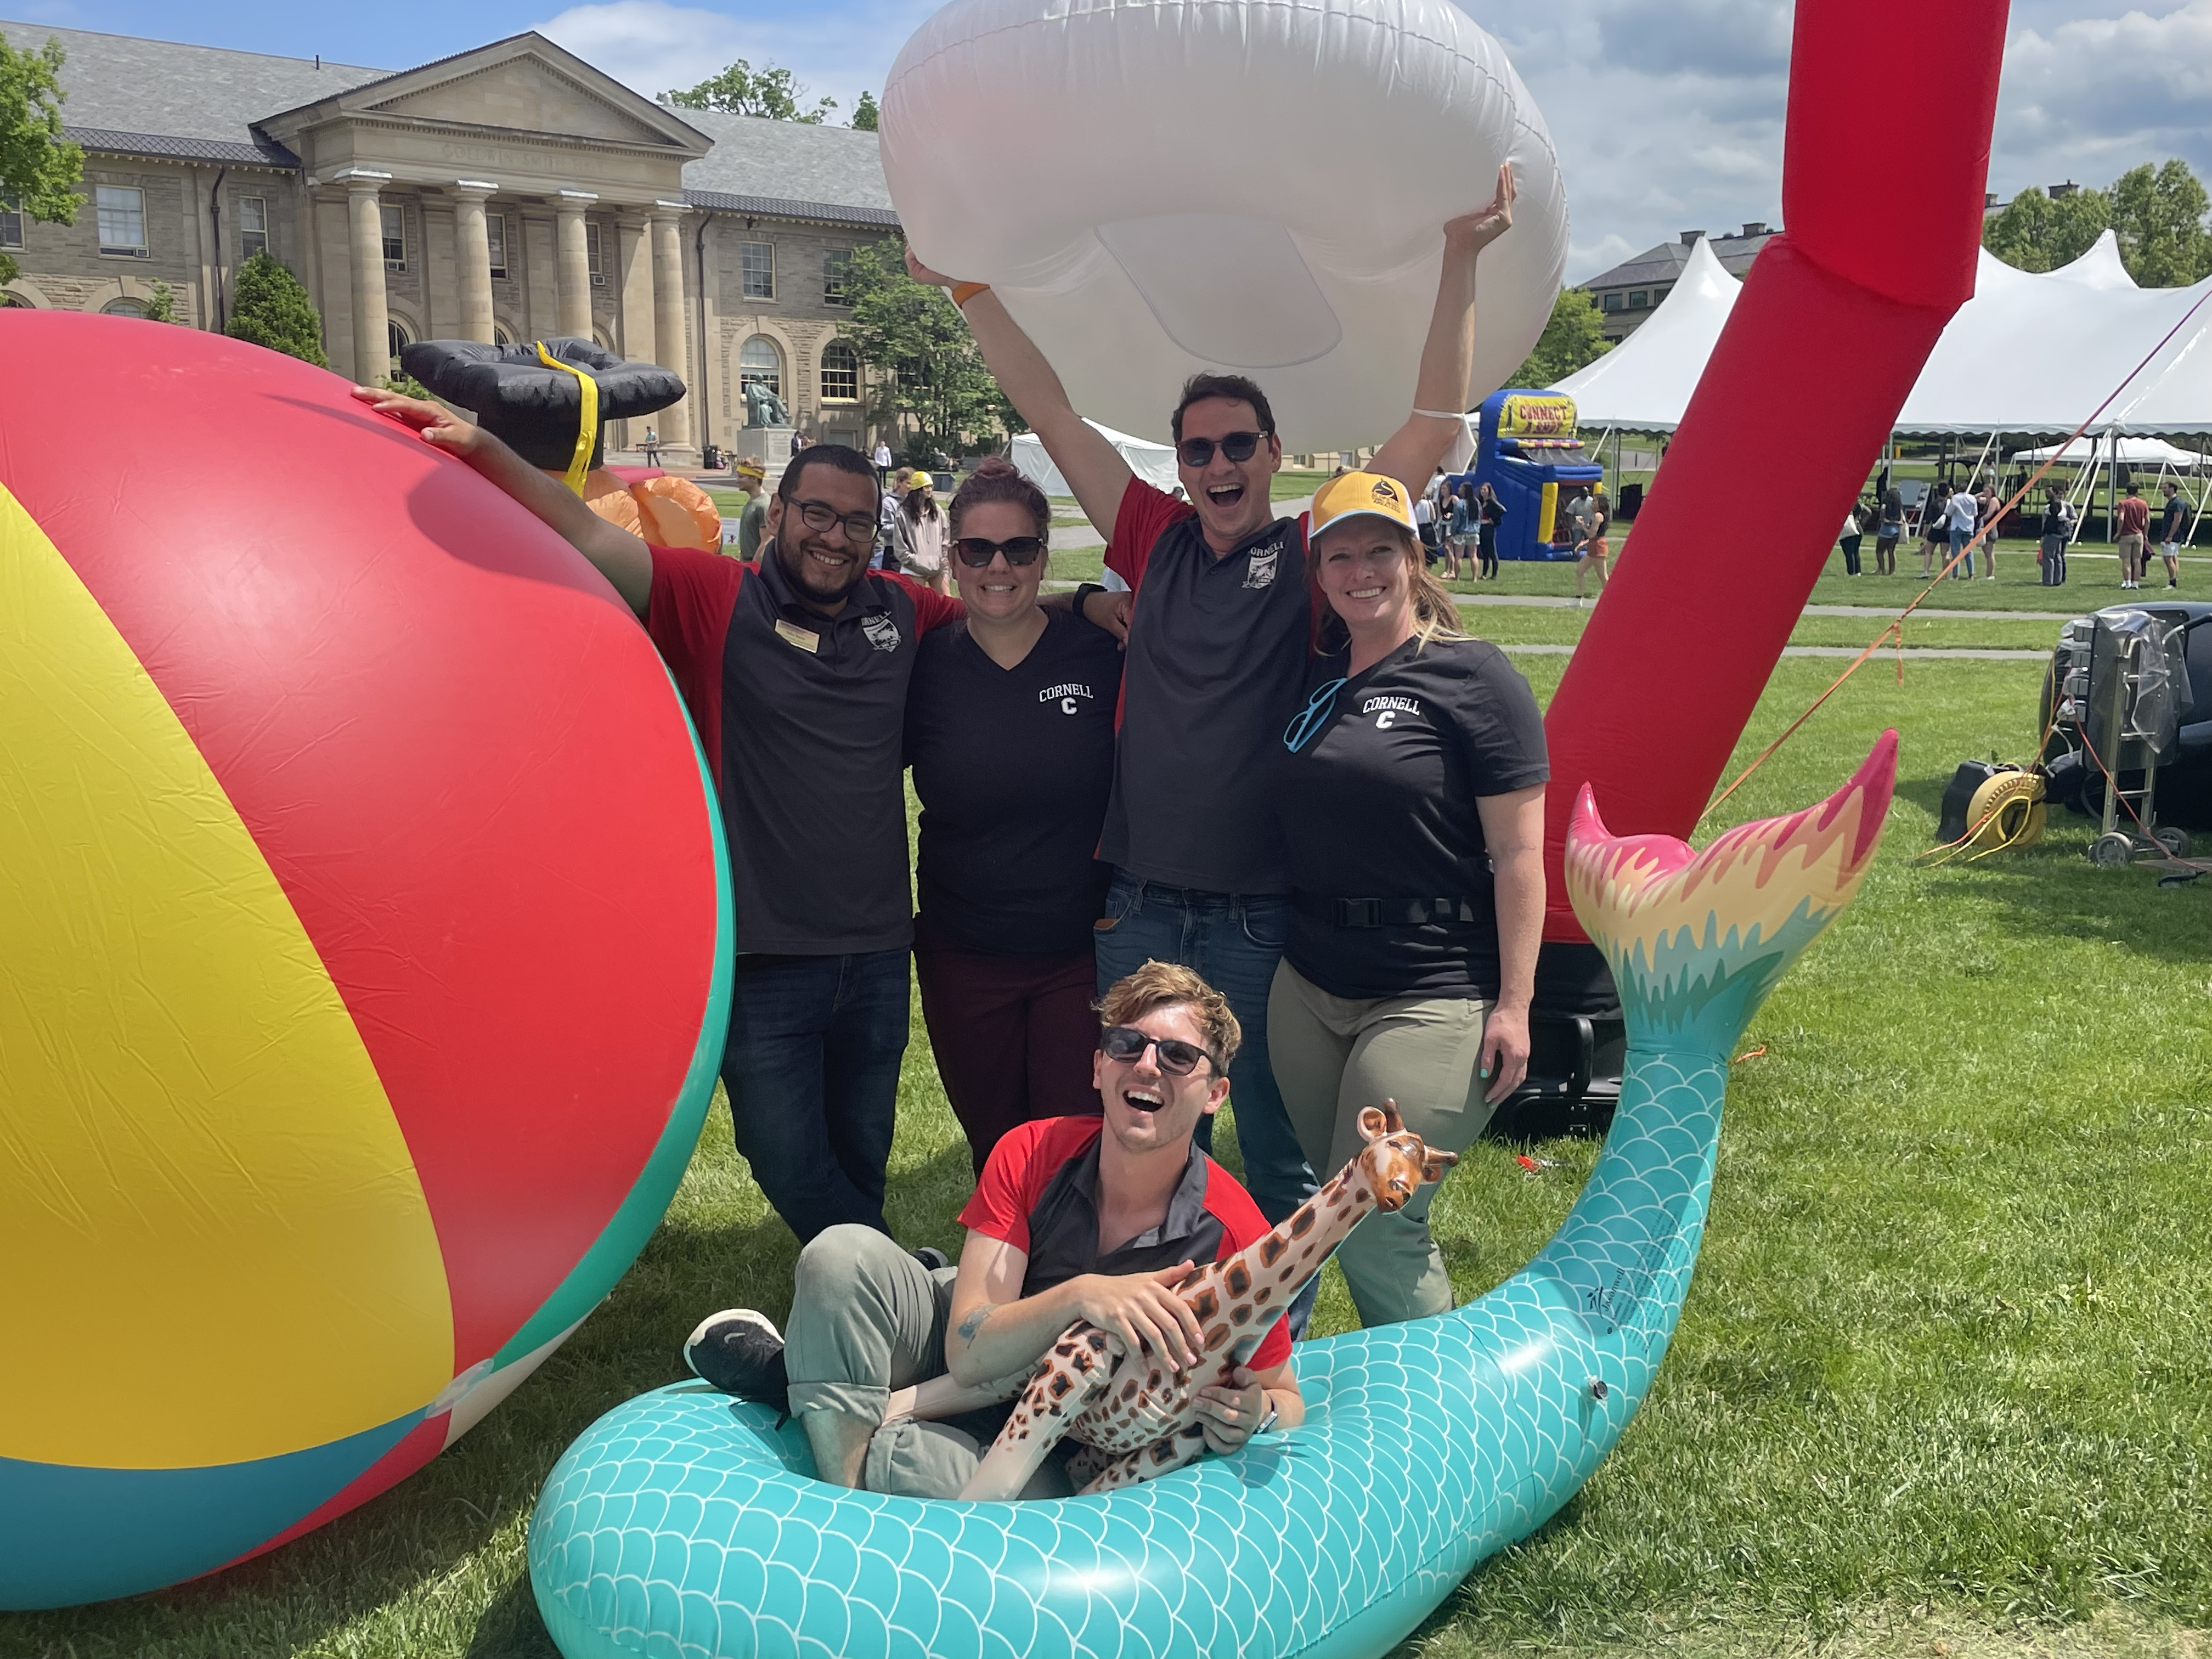 The Campus Activities events team with large inflatables on the Arts Quad.